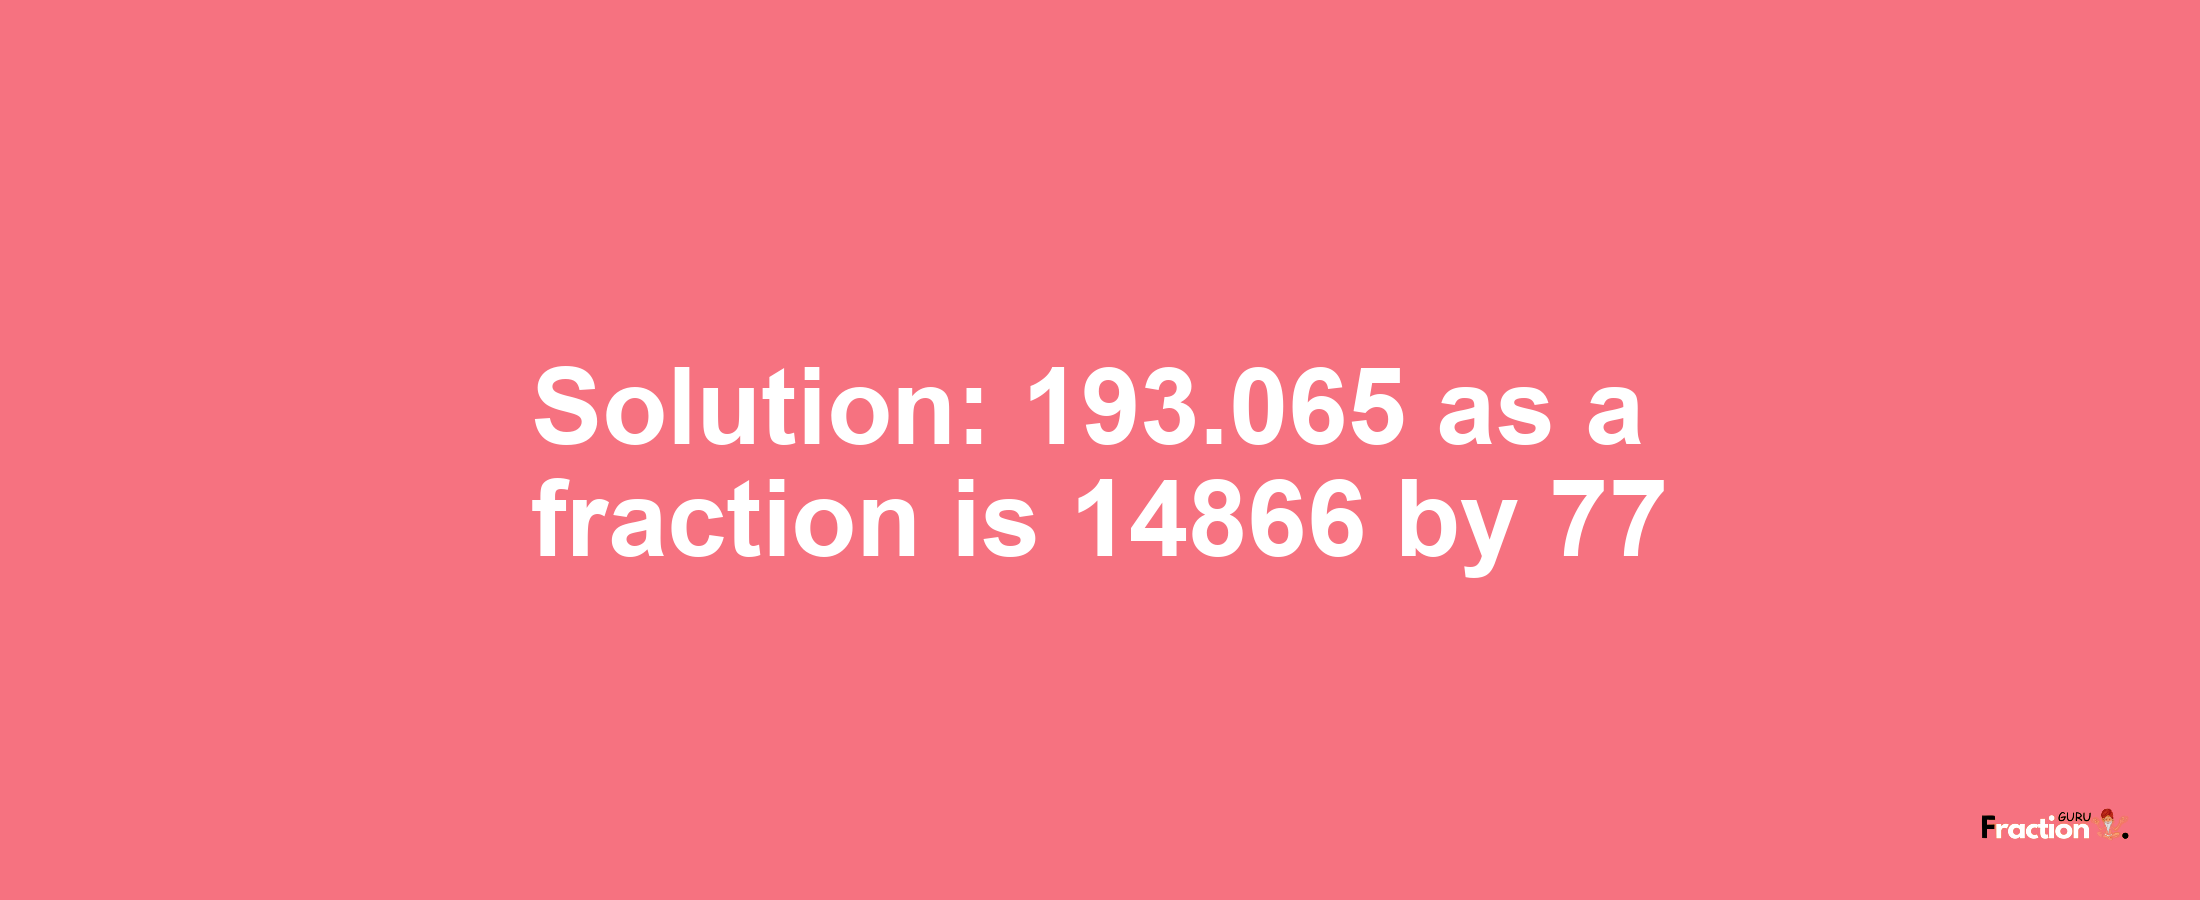 Solution:193.065 as a fraction is 14866/77